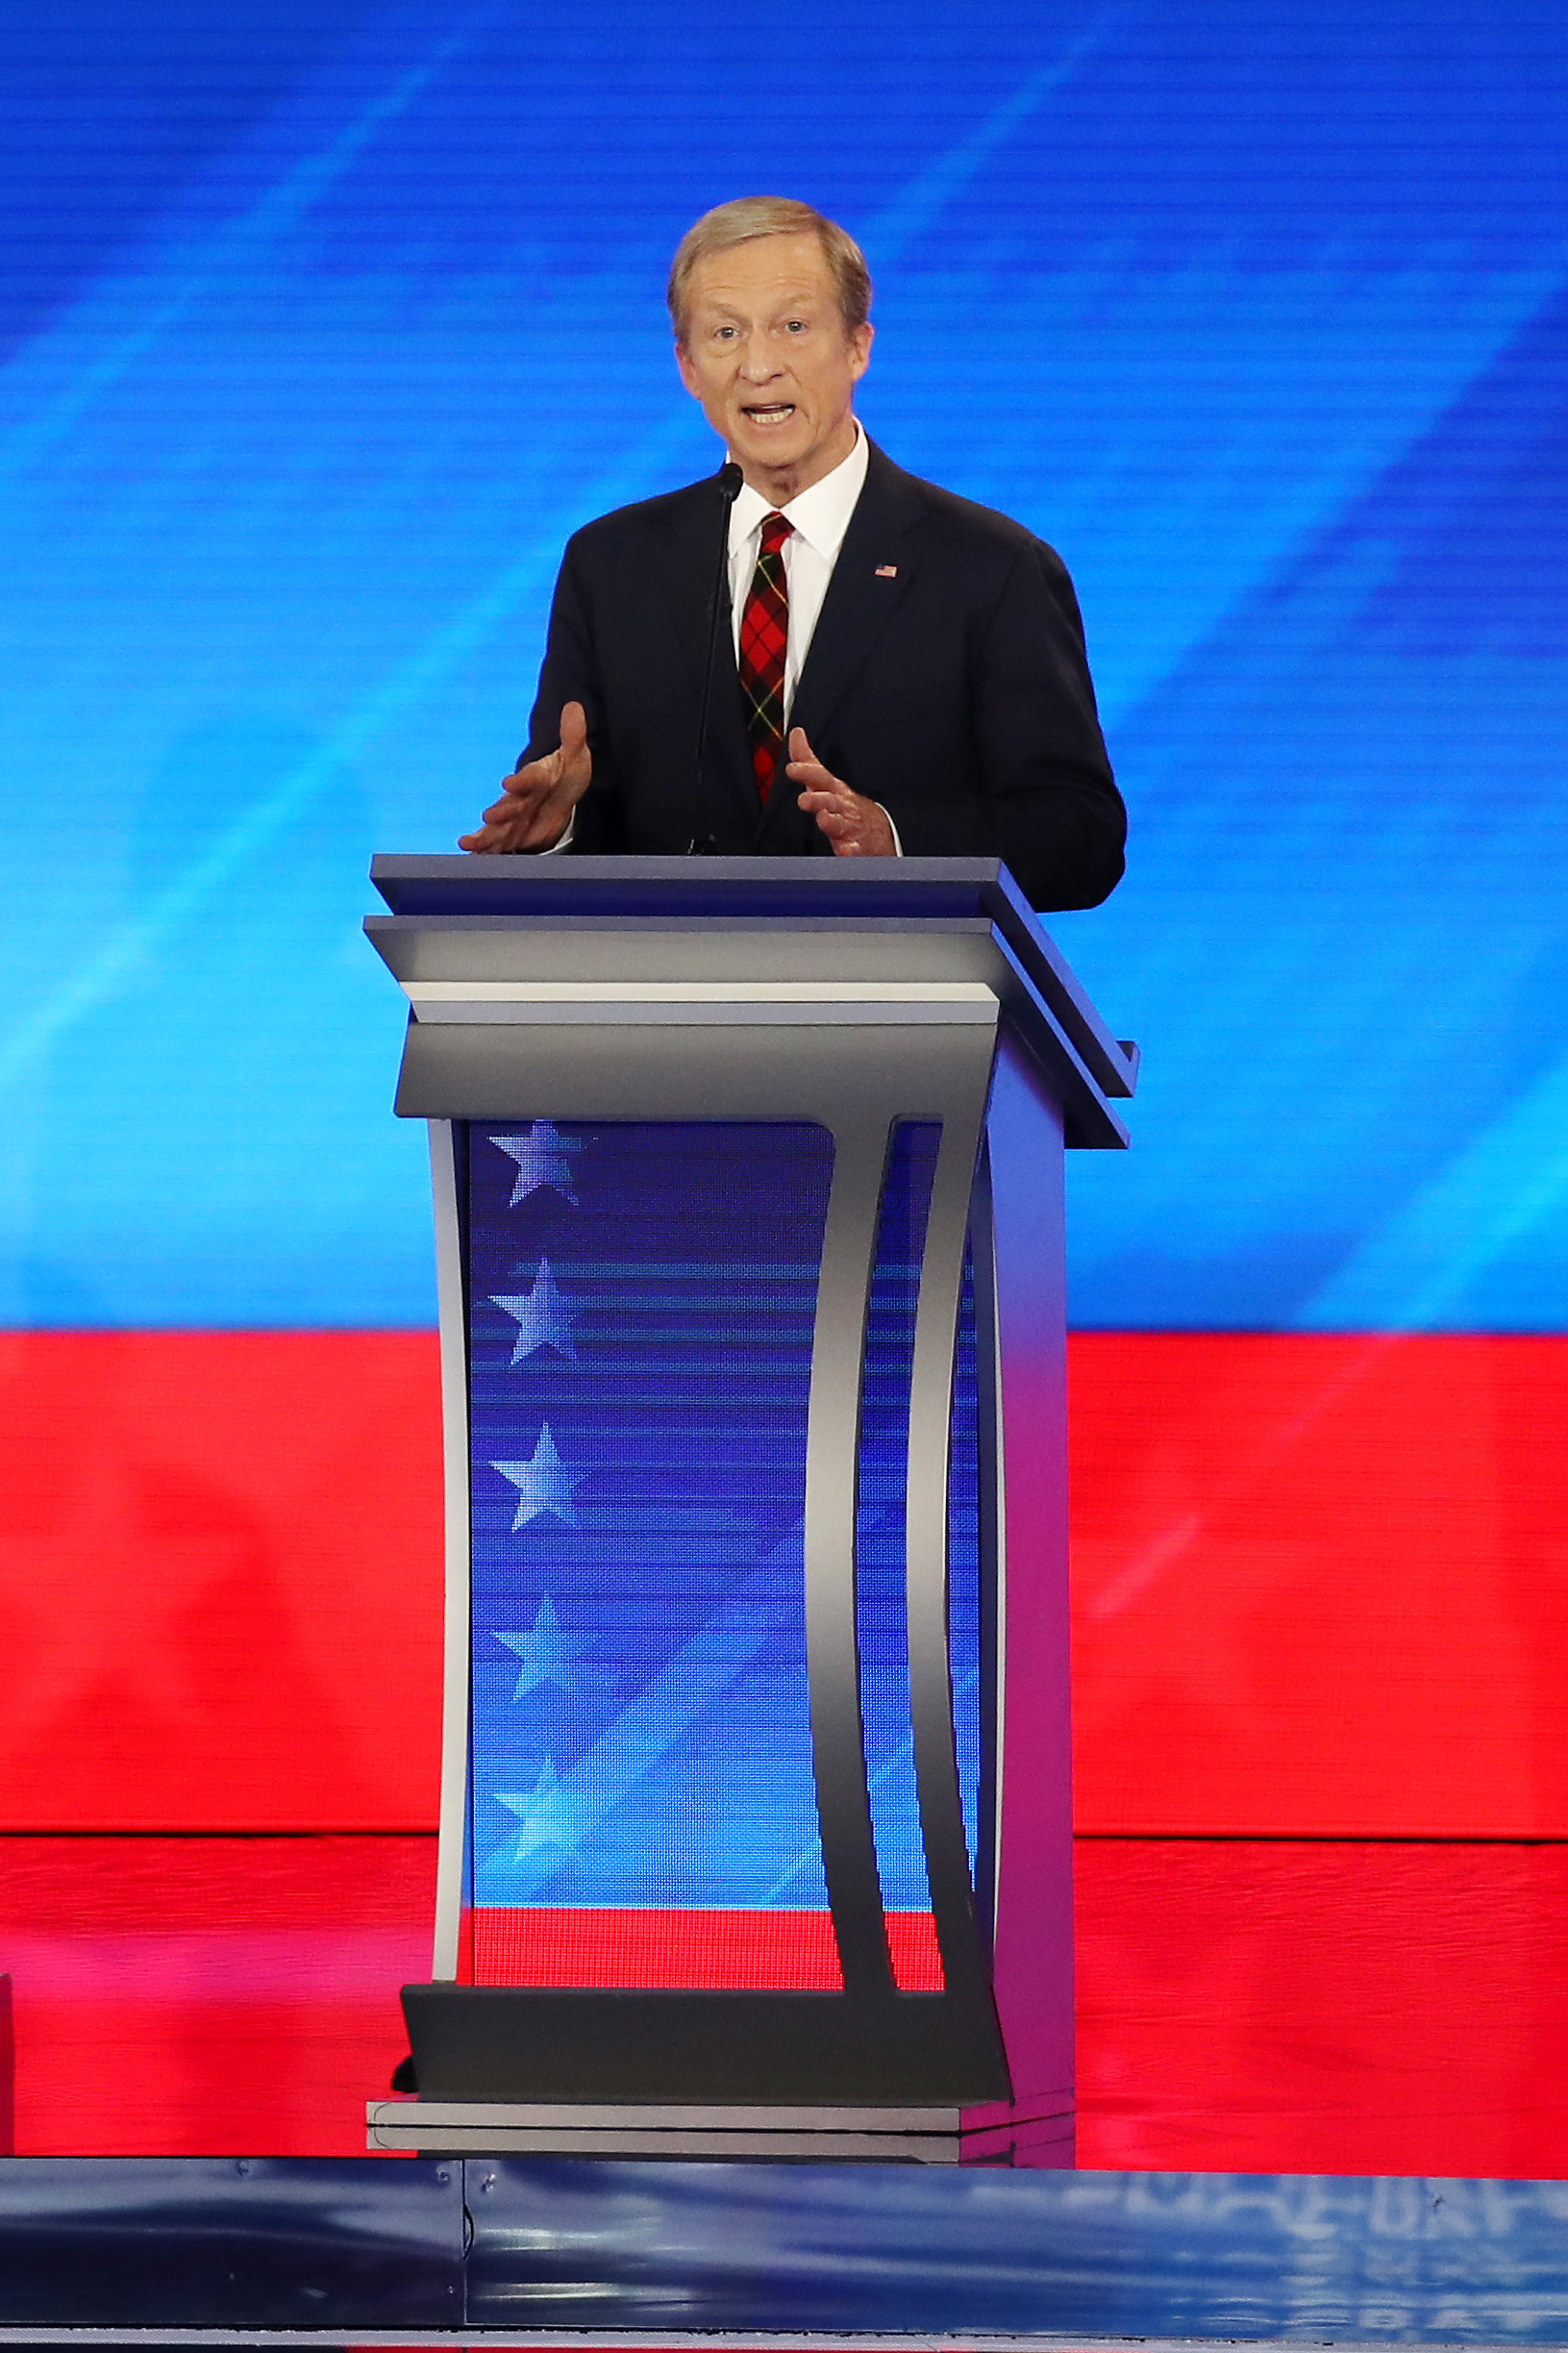 PHOTO: Democratic presidential candidate Tom Steyer participates in the Democratic presidential primary debate in the Sullivan Arena at St. Anselm College on February 07, 2020 in Manchester, New Hampshire.